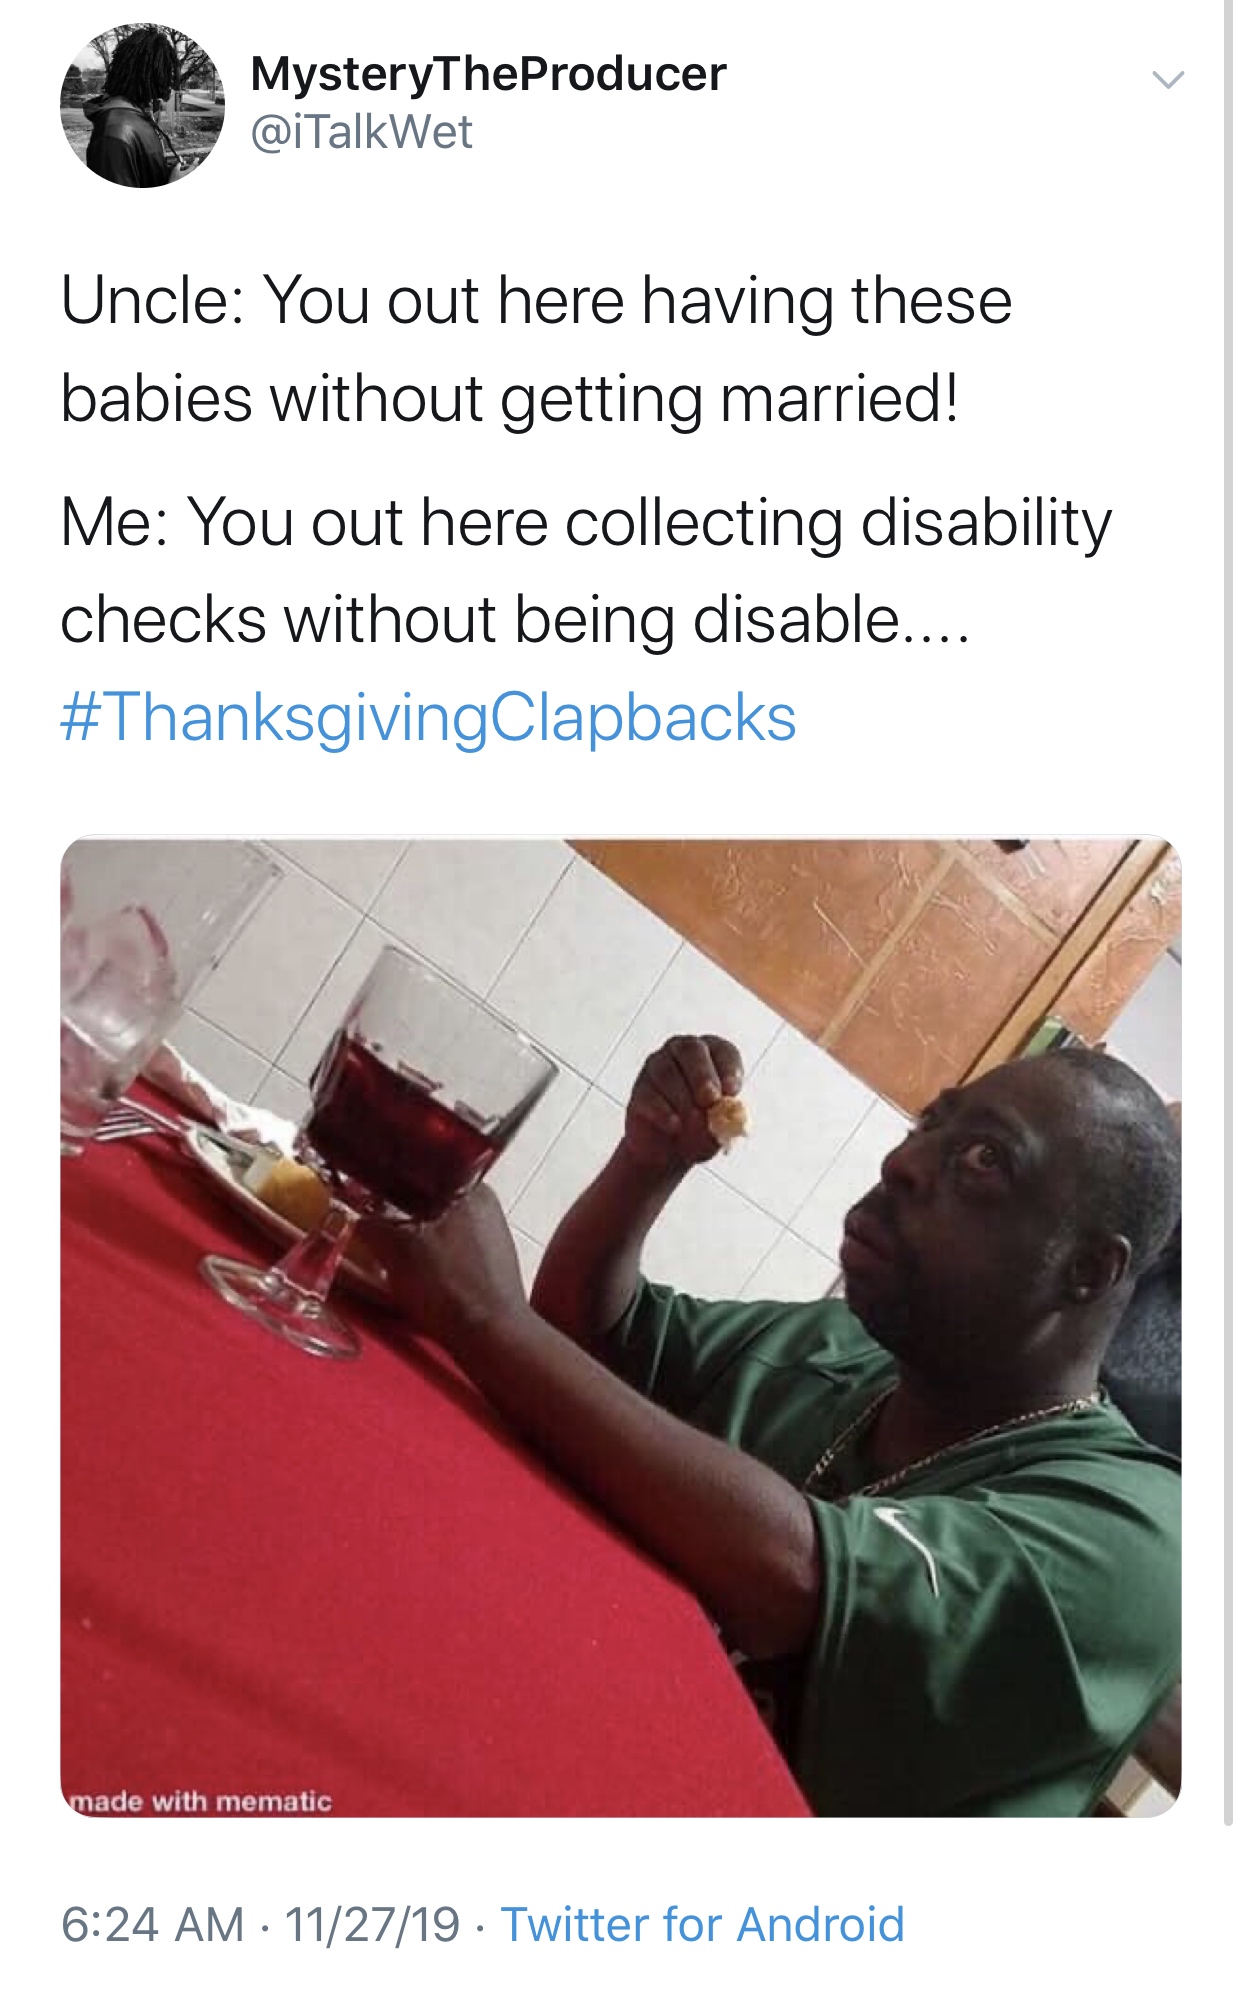 3am fatass meme - MysteryTheProducer Wet Uncle You out here having these babies without getting married! Me You out here collecting disability checks without being disable.... Clapbacks 112719. Twitter for Android